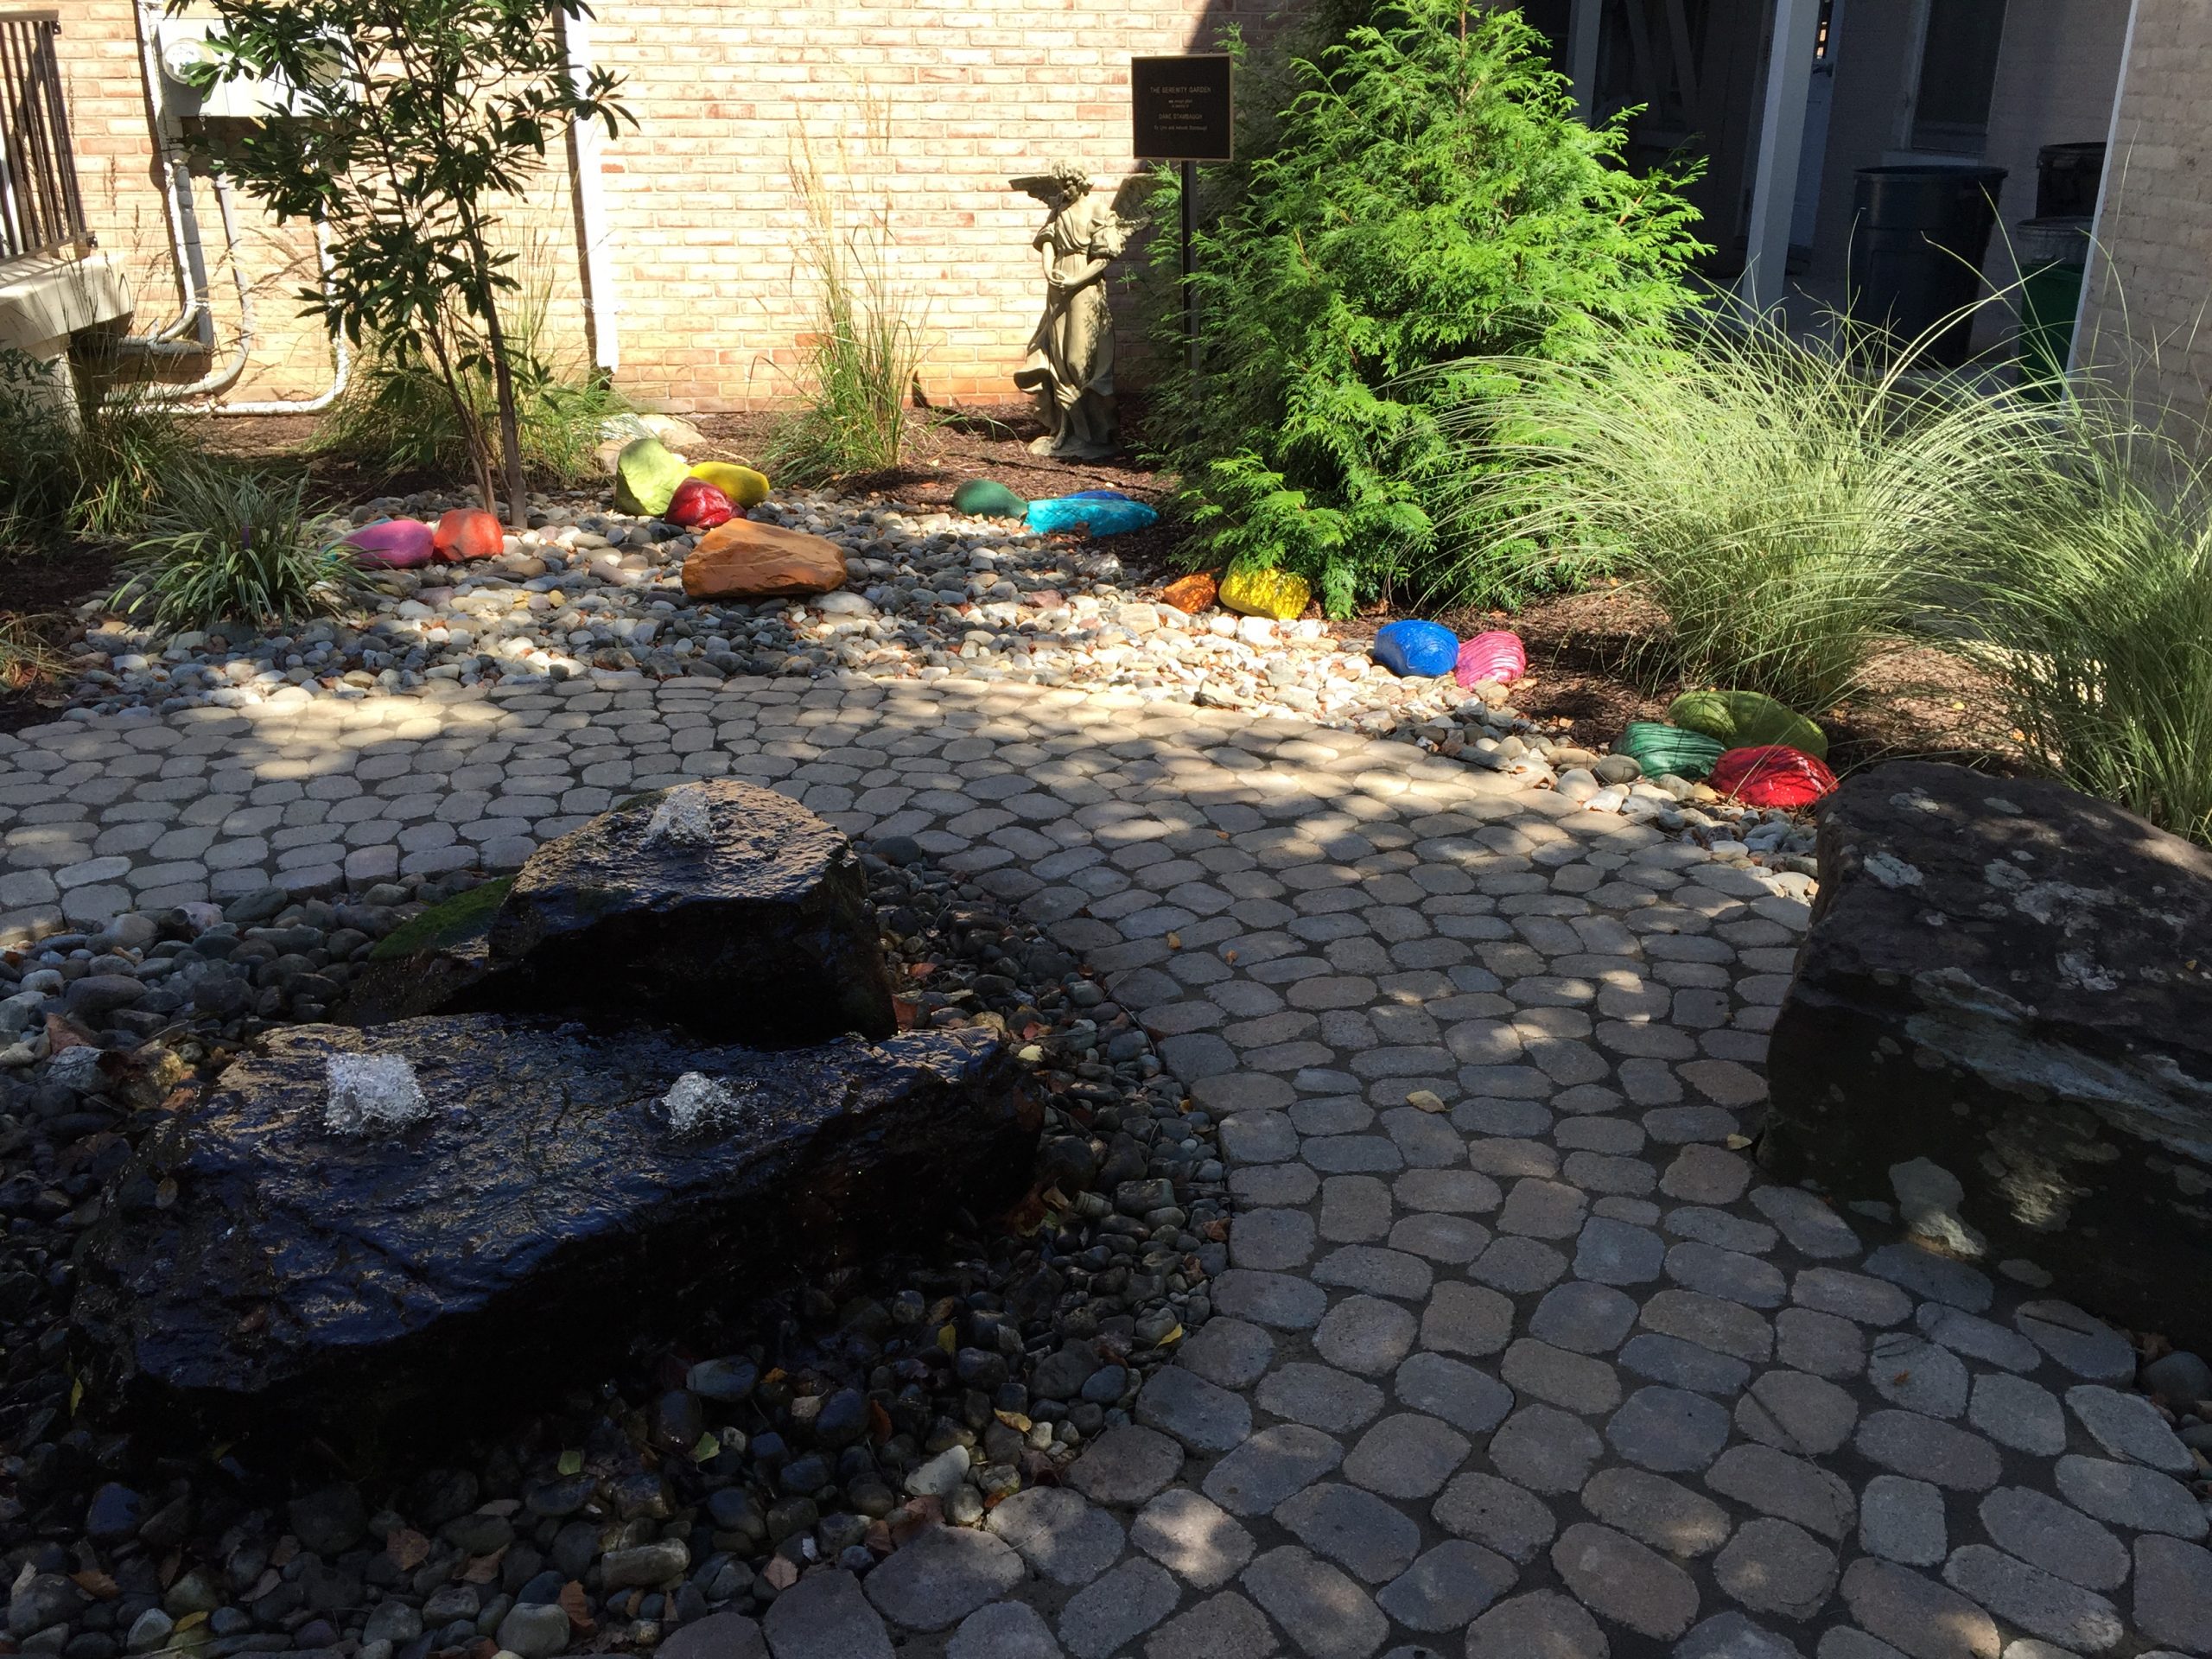 Our garden is designed to welcome visitors. It provides an environment conducive for holding rituals. The bubbling fountain and children’s rock garden bring a sense of peace for our families. The garden was lovingly gifted by Lynn and Hannah Stambaugh in memory of husband and father, Dane.